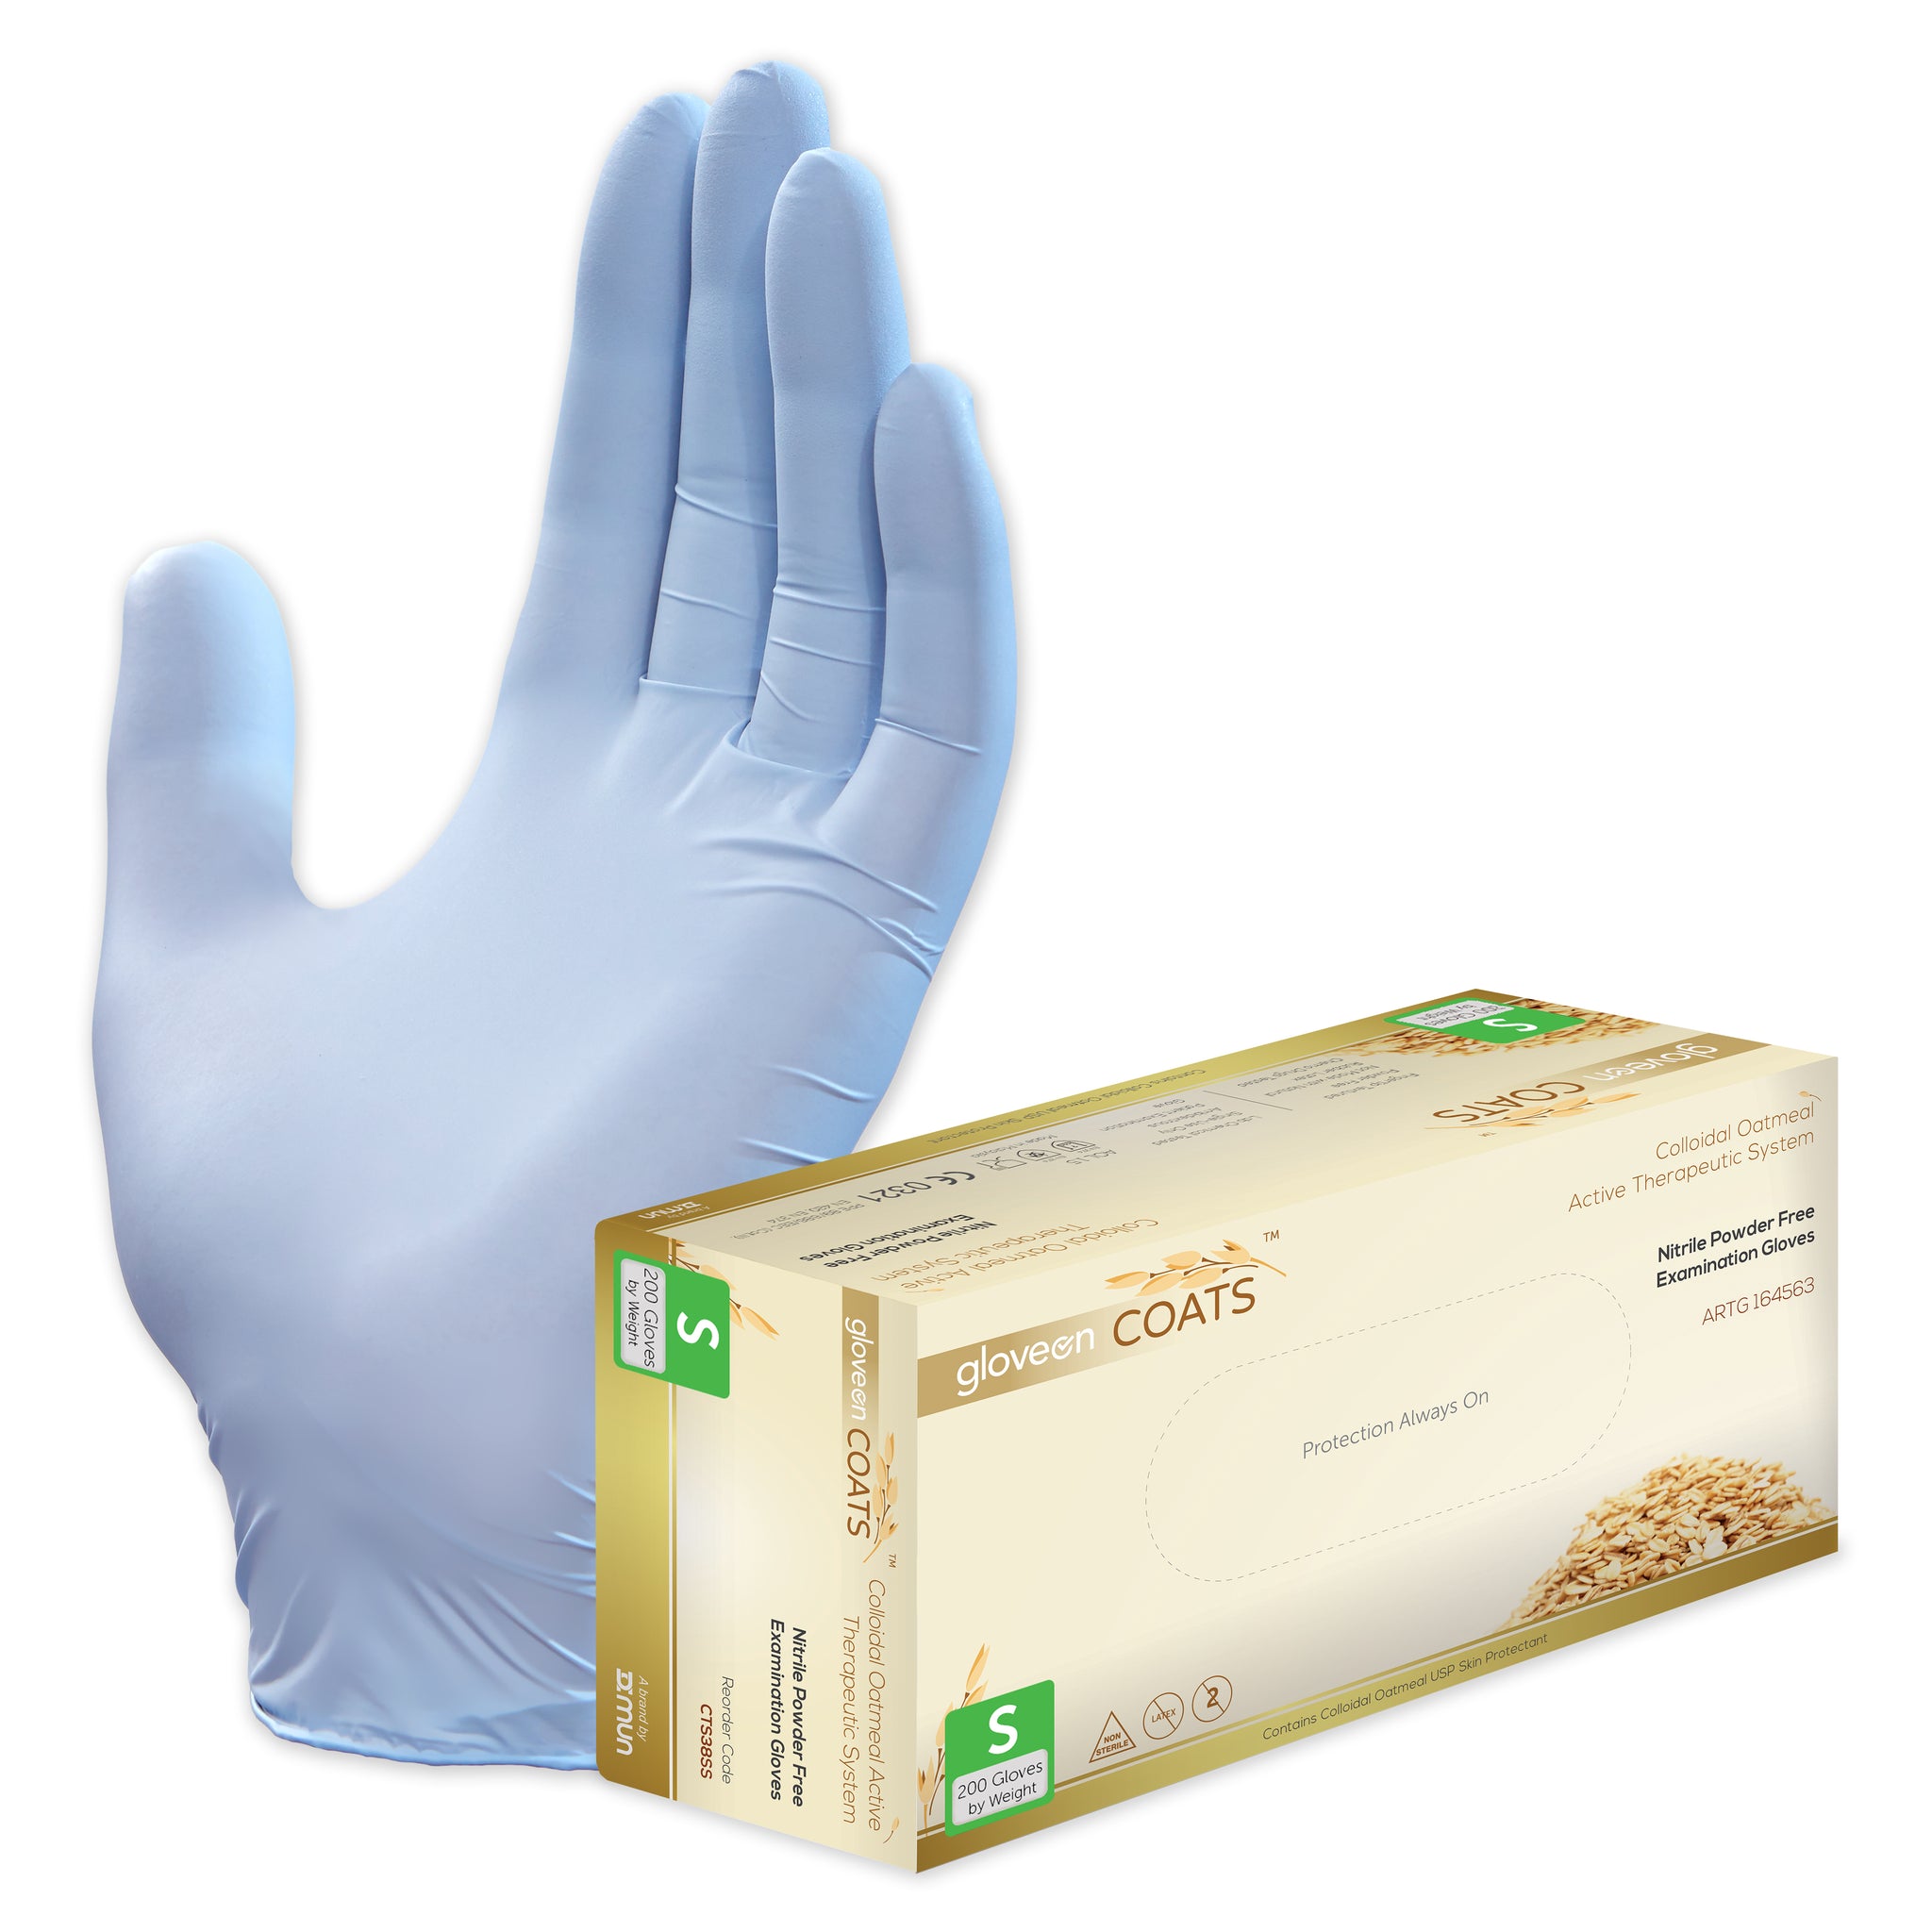 Nitrile Exam Gloves with Colloidal Oatmeal System, Powder Free, Non-Sterile, Fingertip Textured, Colloidal Oats Coated, Standard Cuff, Dawn Blue - Box of 200, S